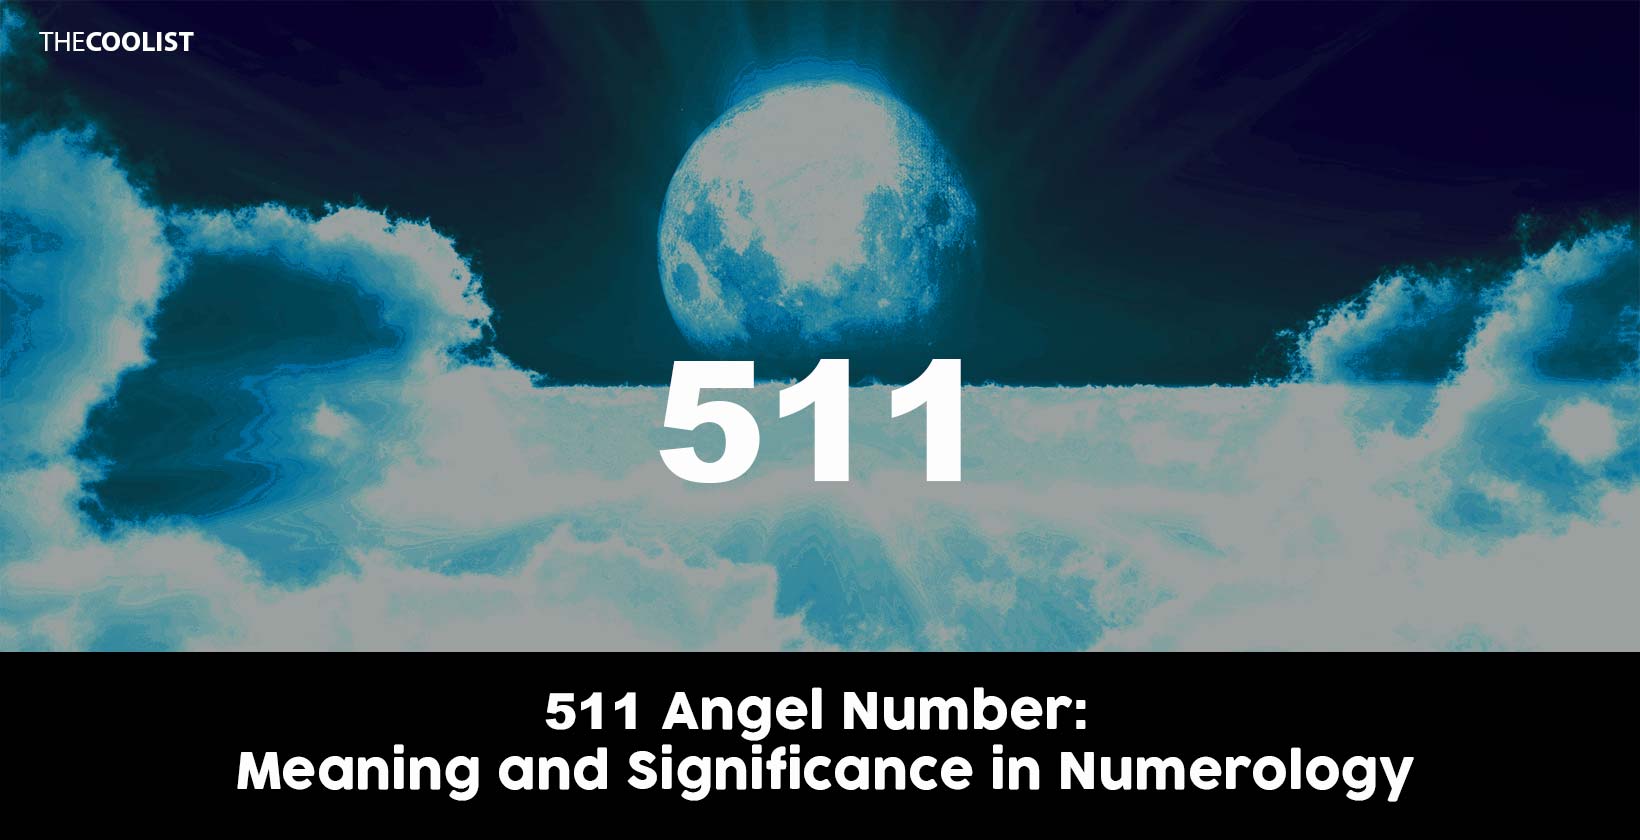 511 Angel Number: Meaning and Significance in Numerology